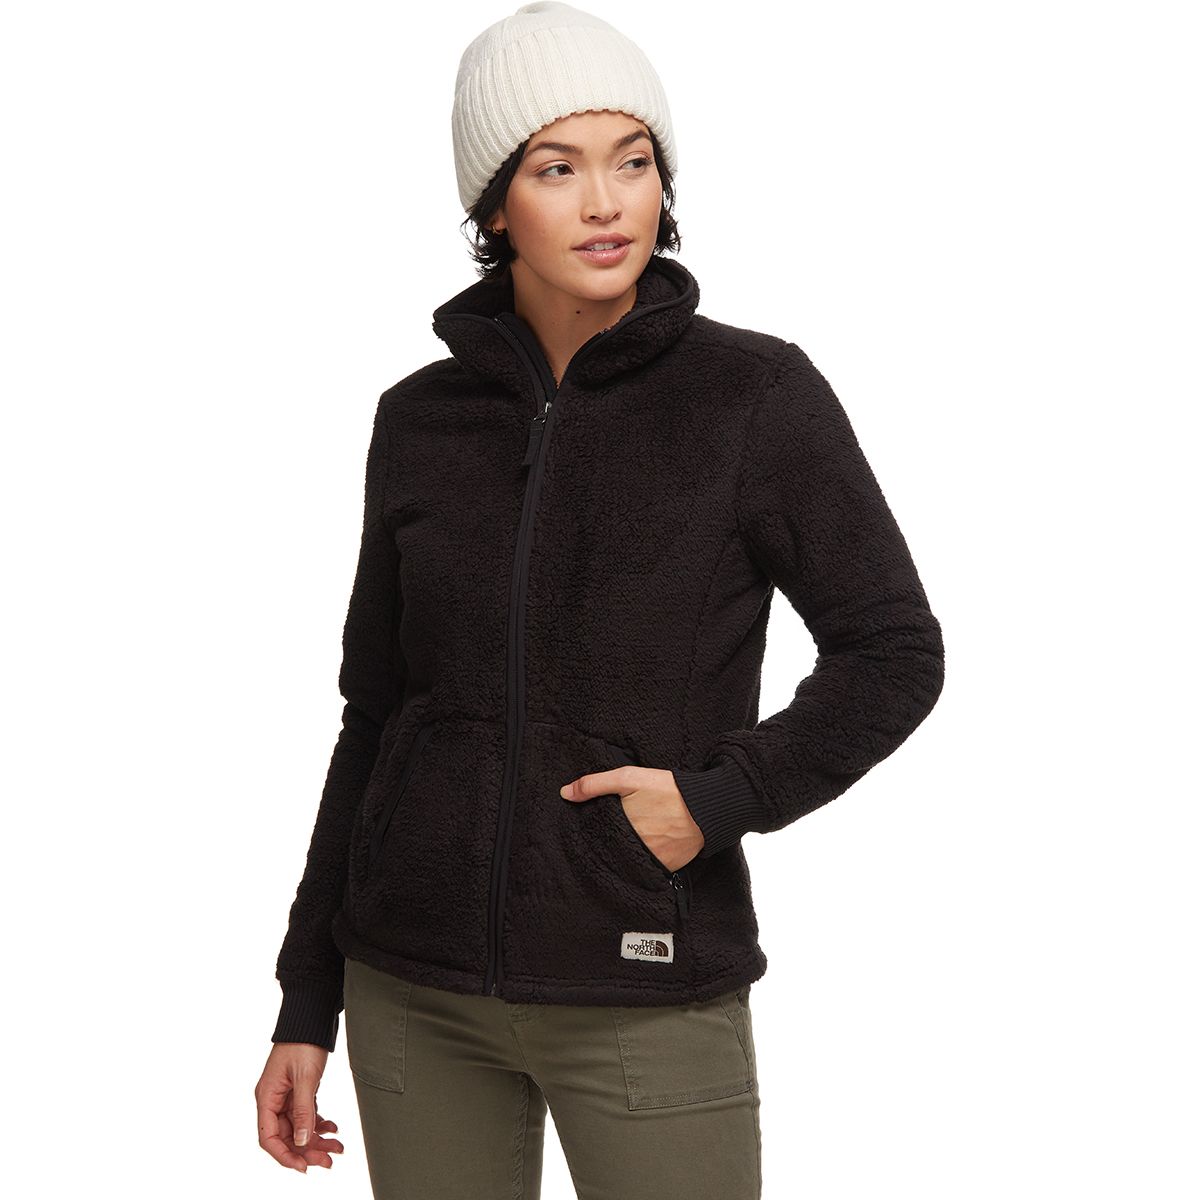 The North Face Campshire Full-Zip Fleece Jacket - Women's | Backcountry.com